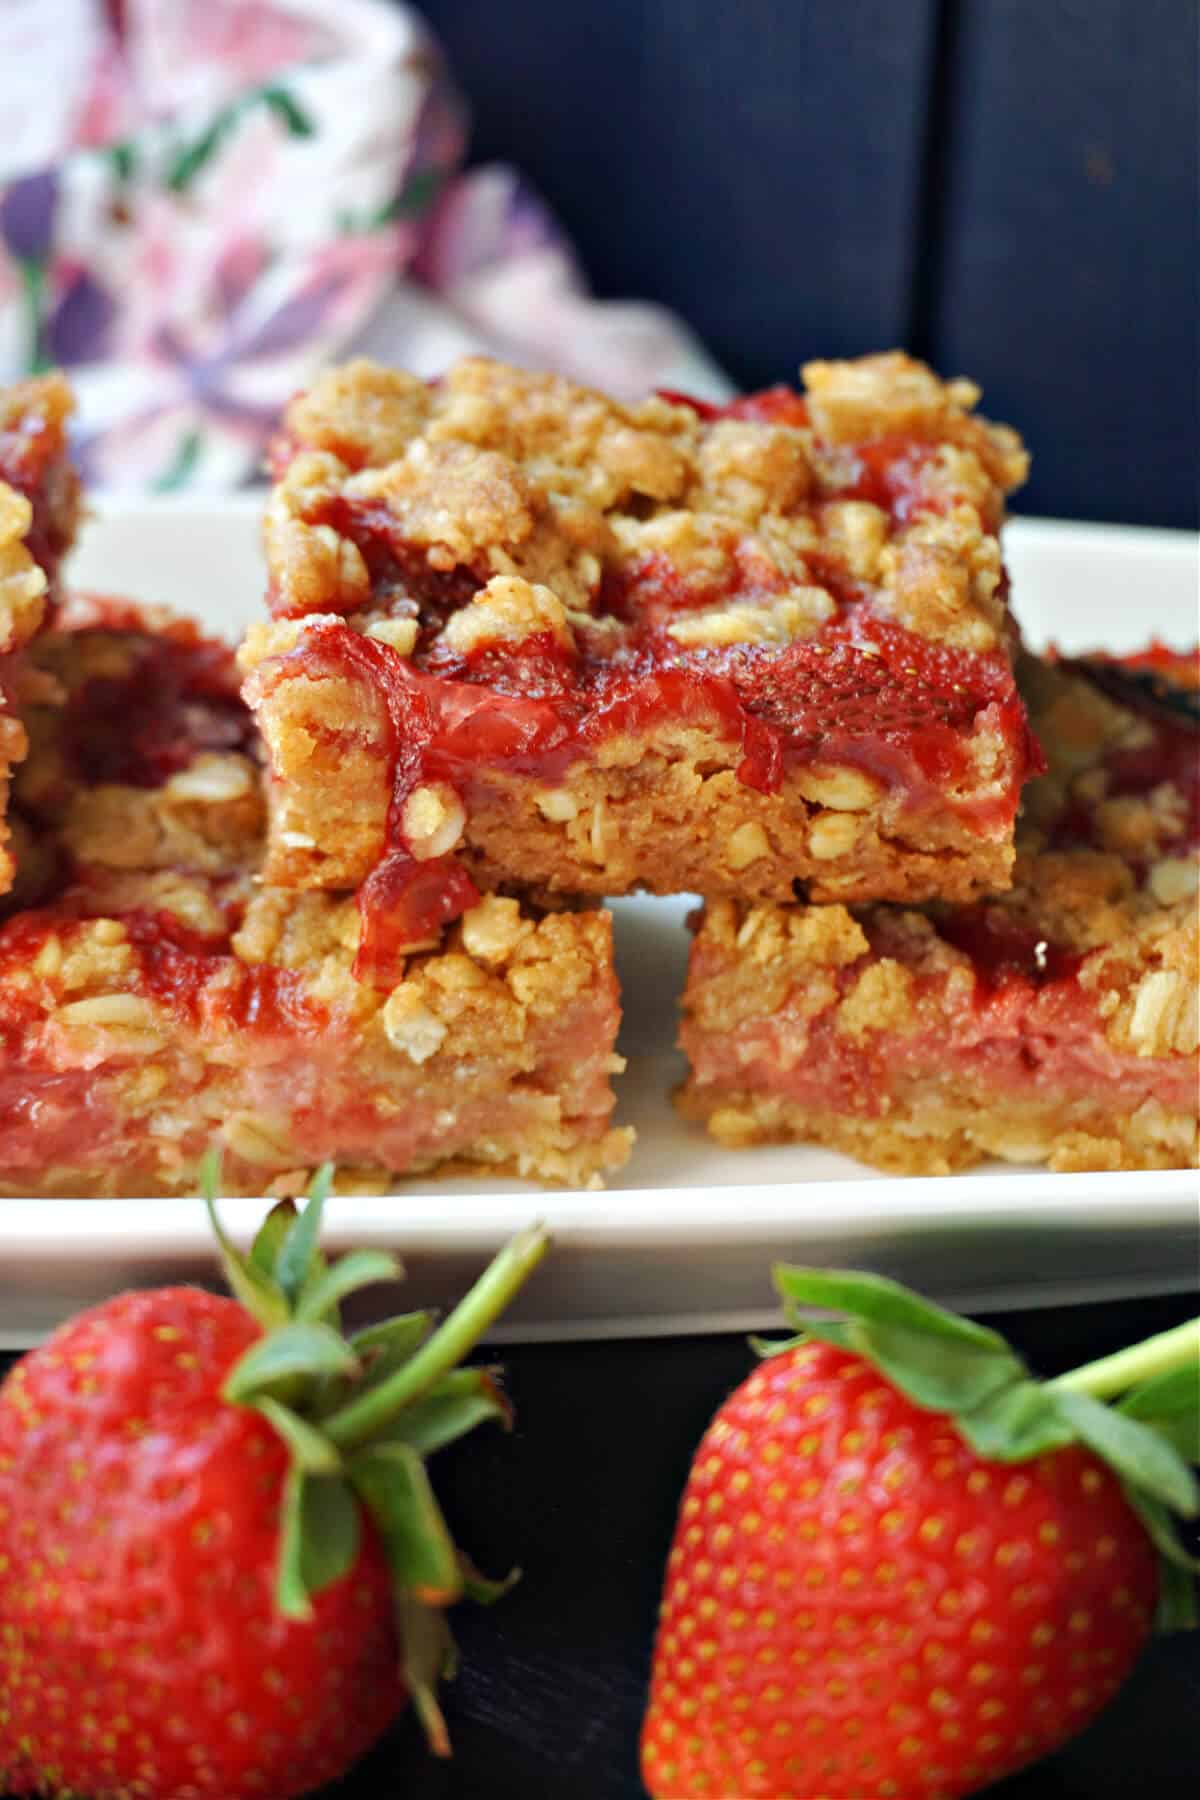 A stack of 3 strawberry crumble bars on a white plate with 2 strawberries in front of it.